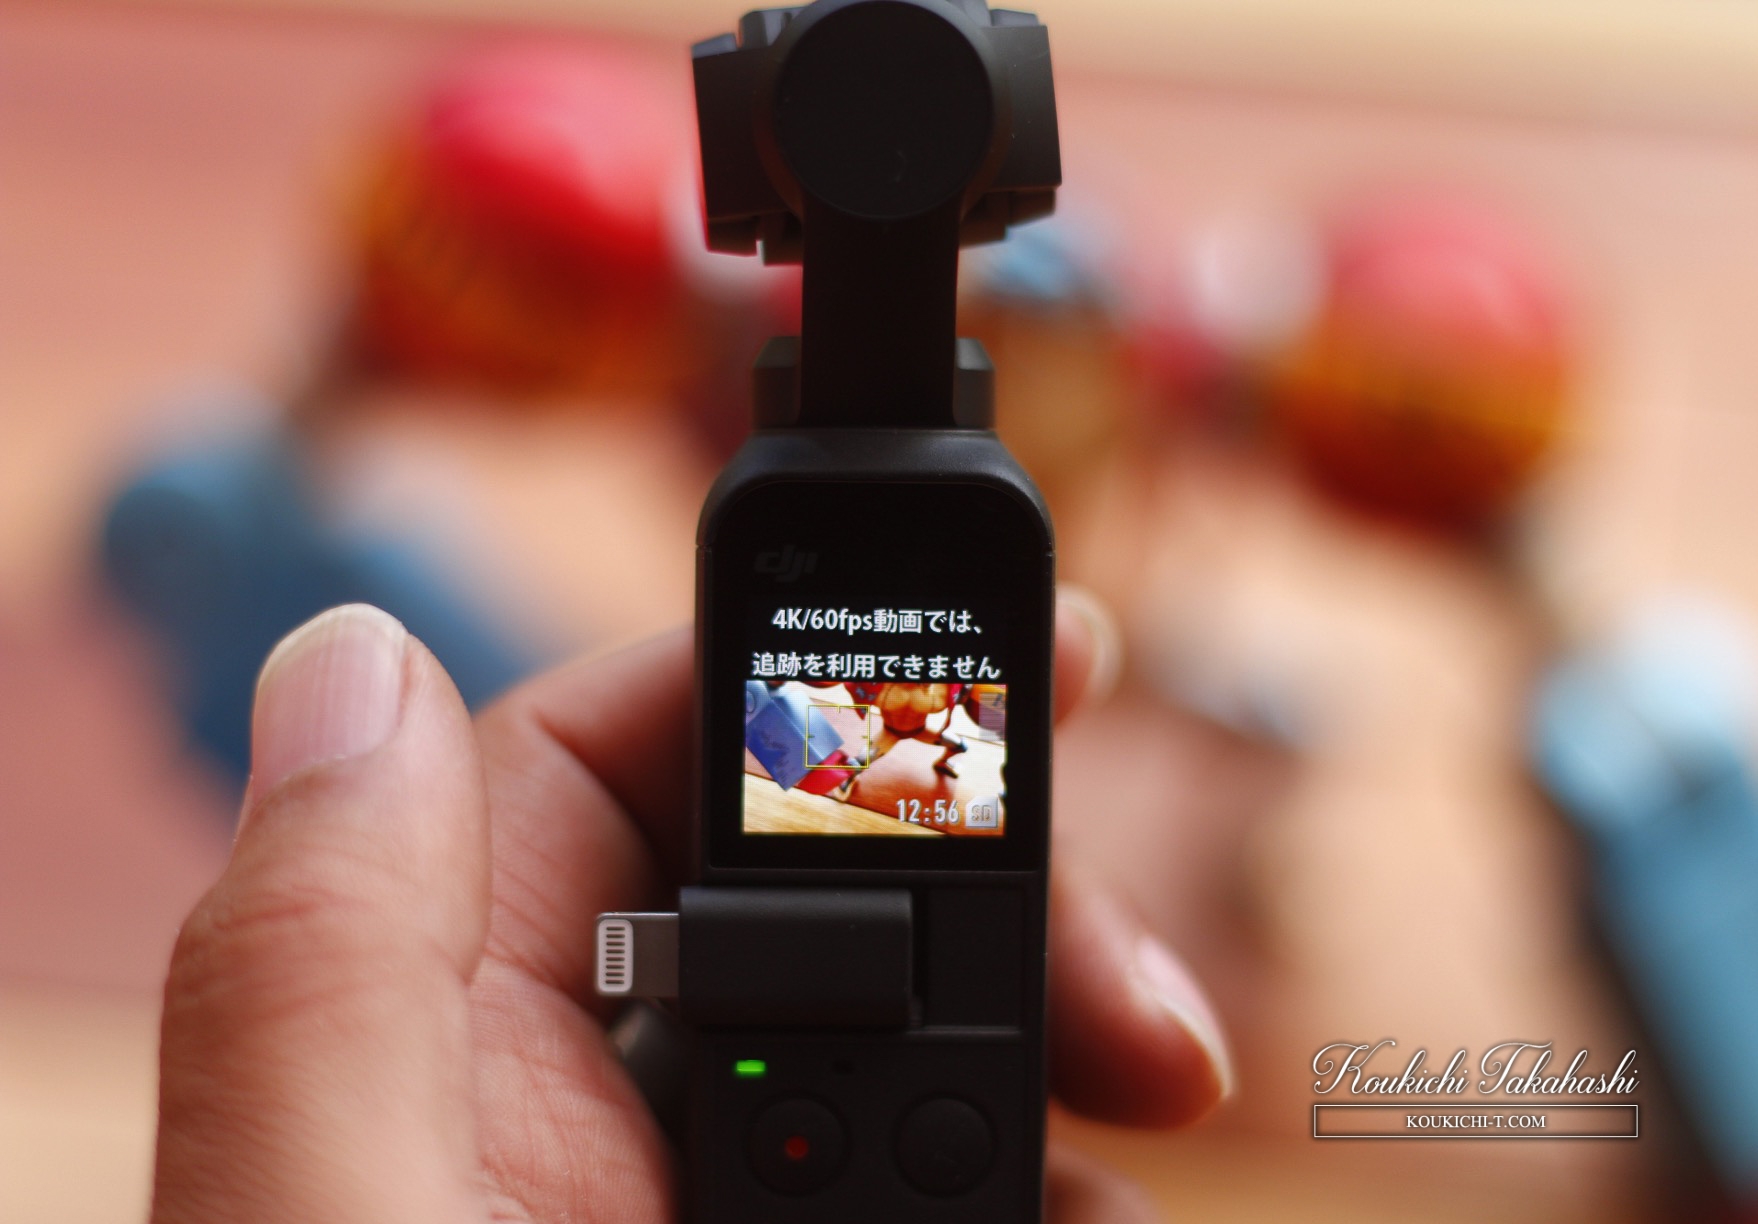 Can't use Active track/Face tracking when 4k recording with Osmo Pocket...?Review of DJI Osmo Pocket